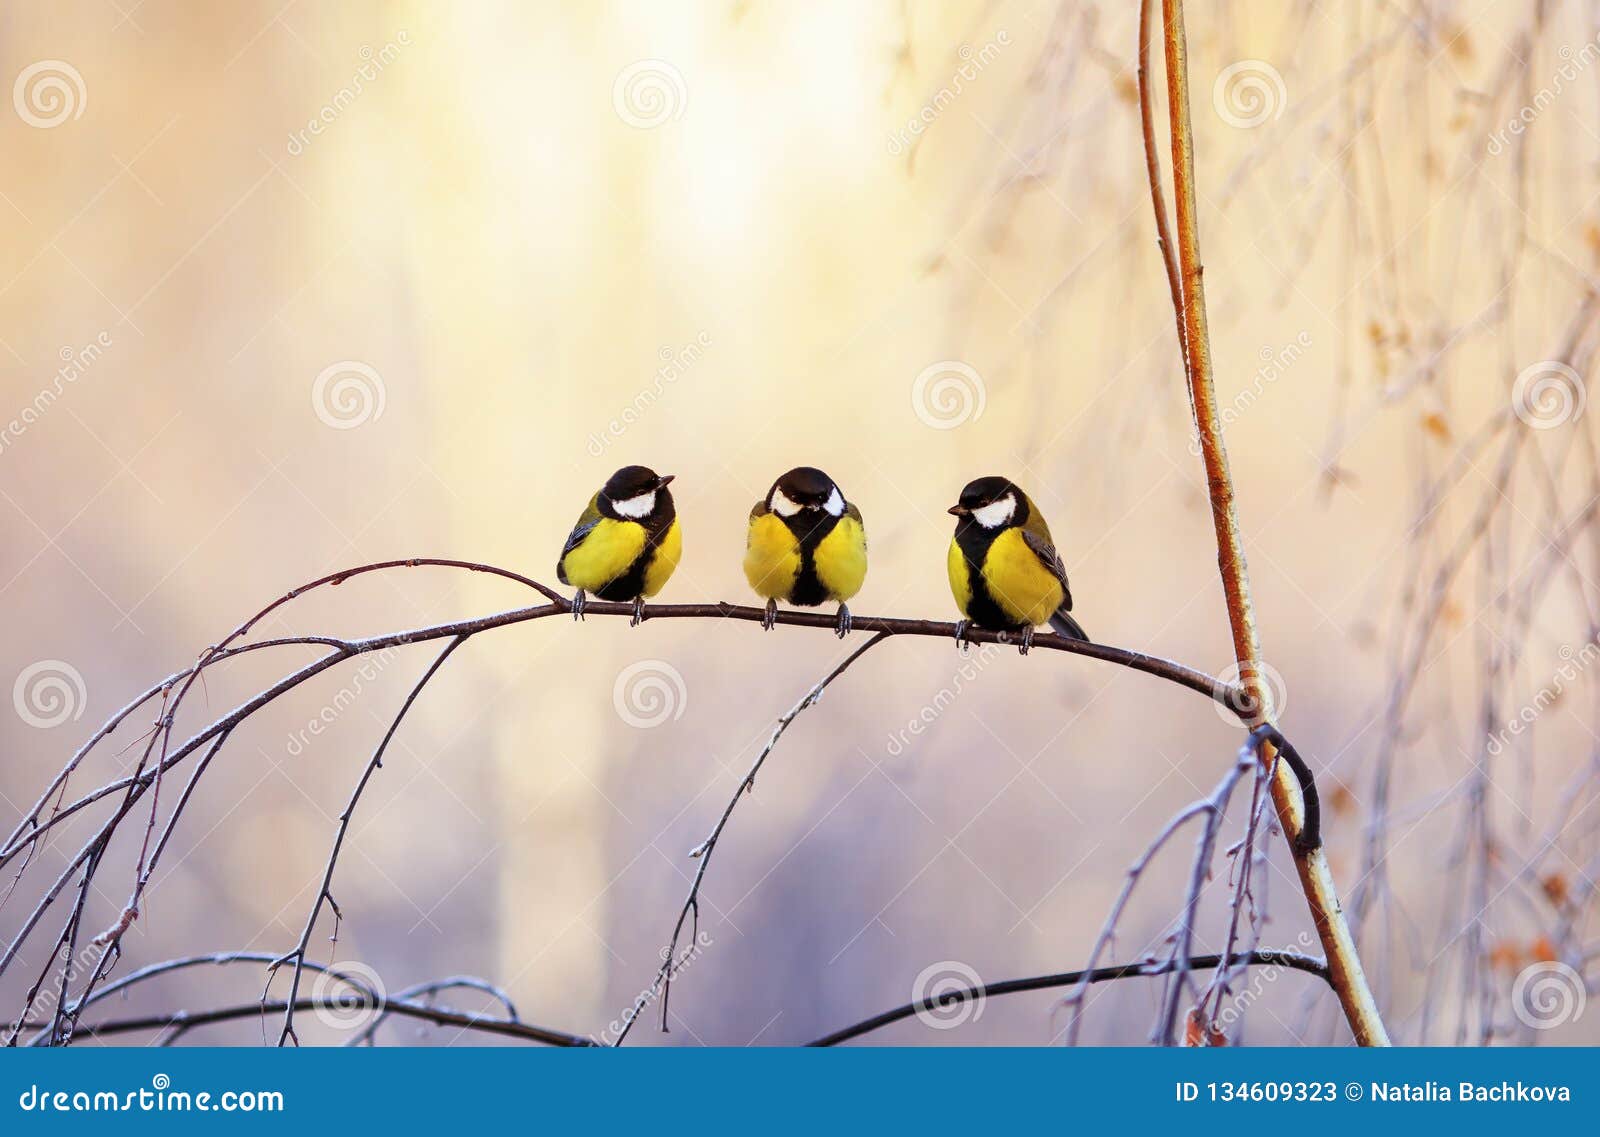 Three Little Bird Tits Sitting on a Birch Branch in a Sunny Park on a  Winter Morning Stock Image - Image of food, blue: 134609323